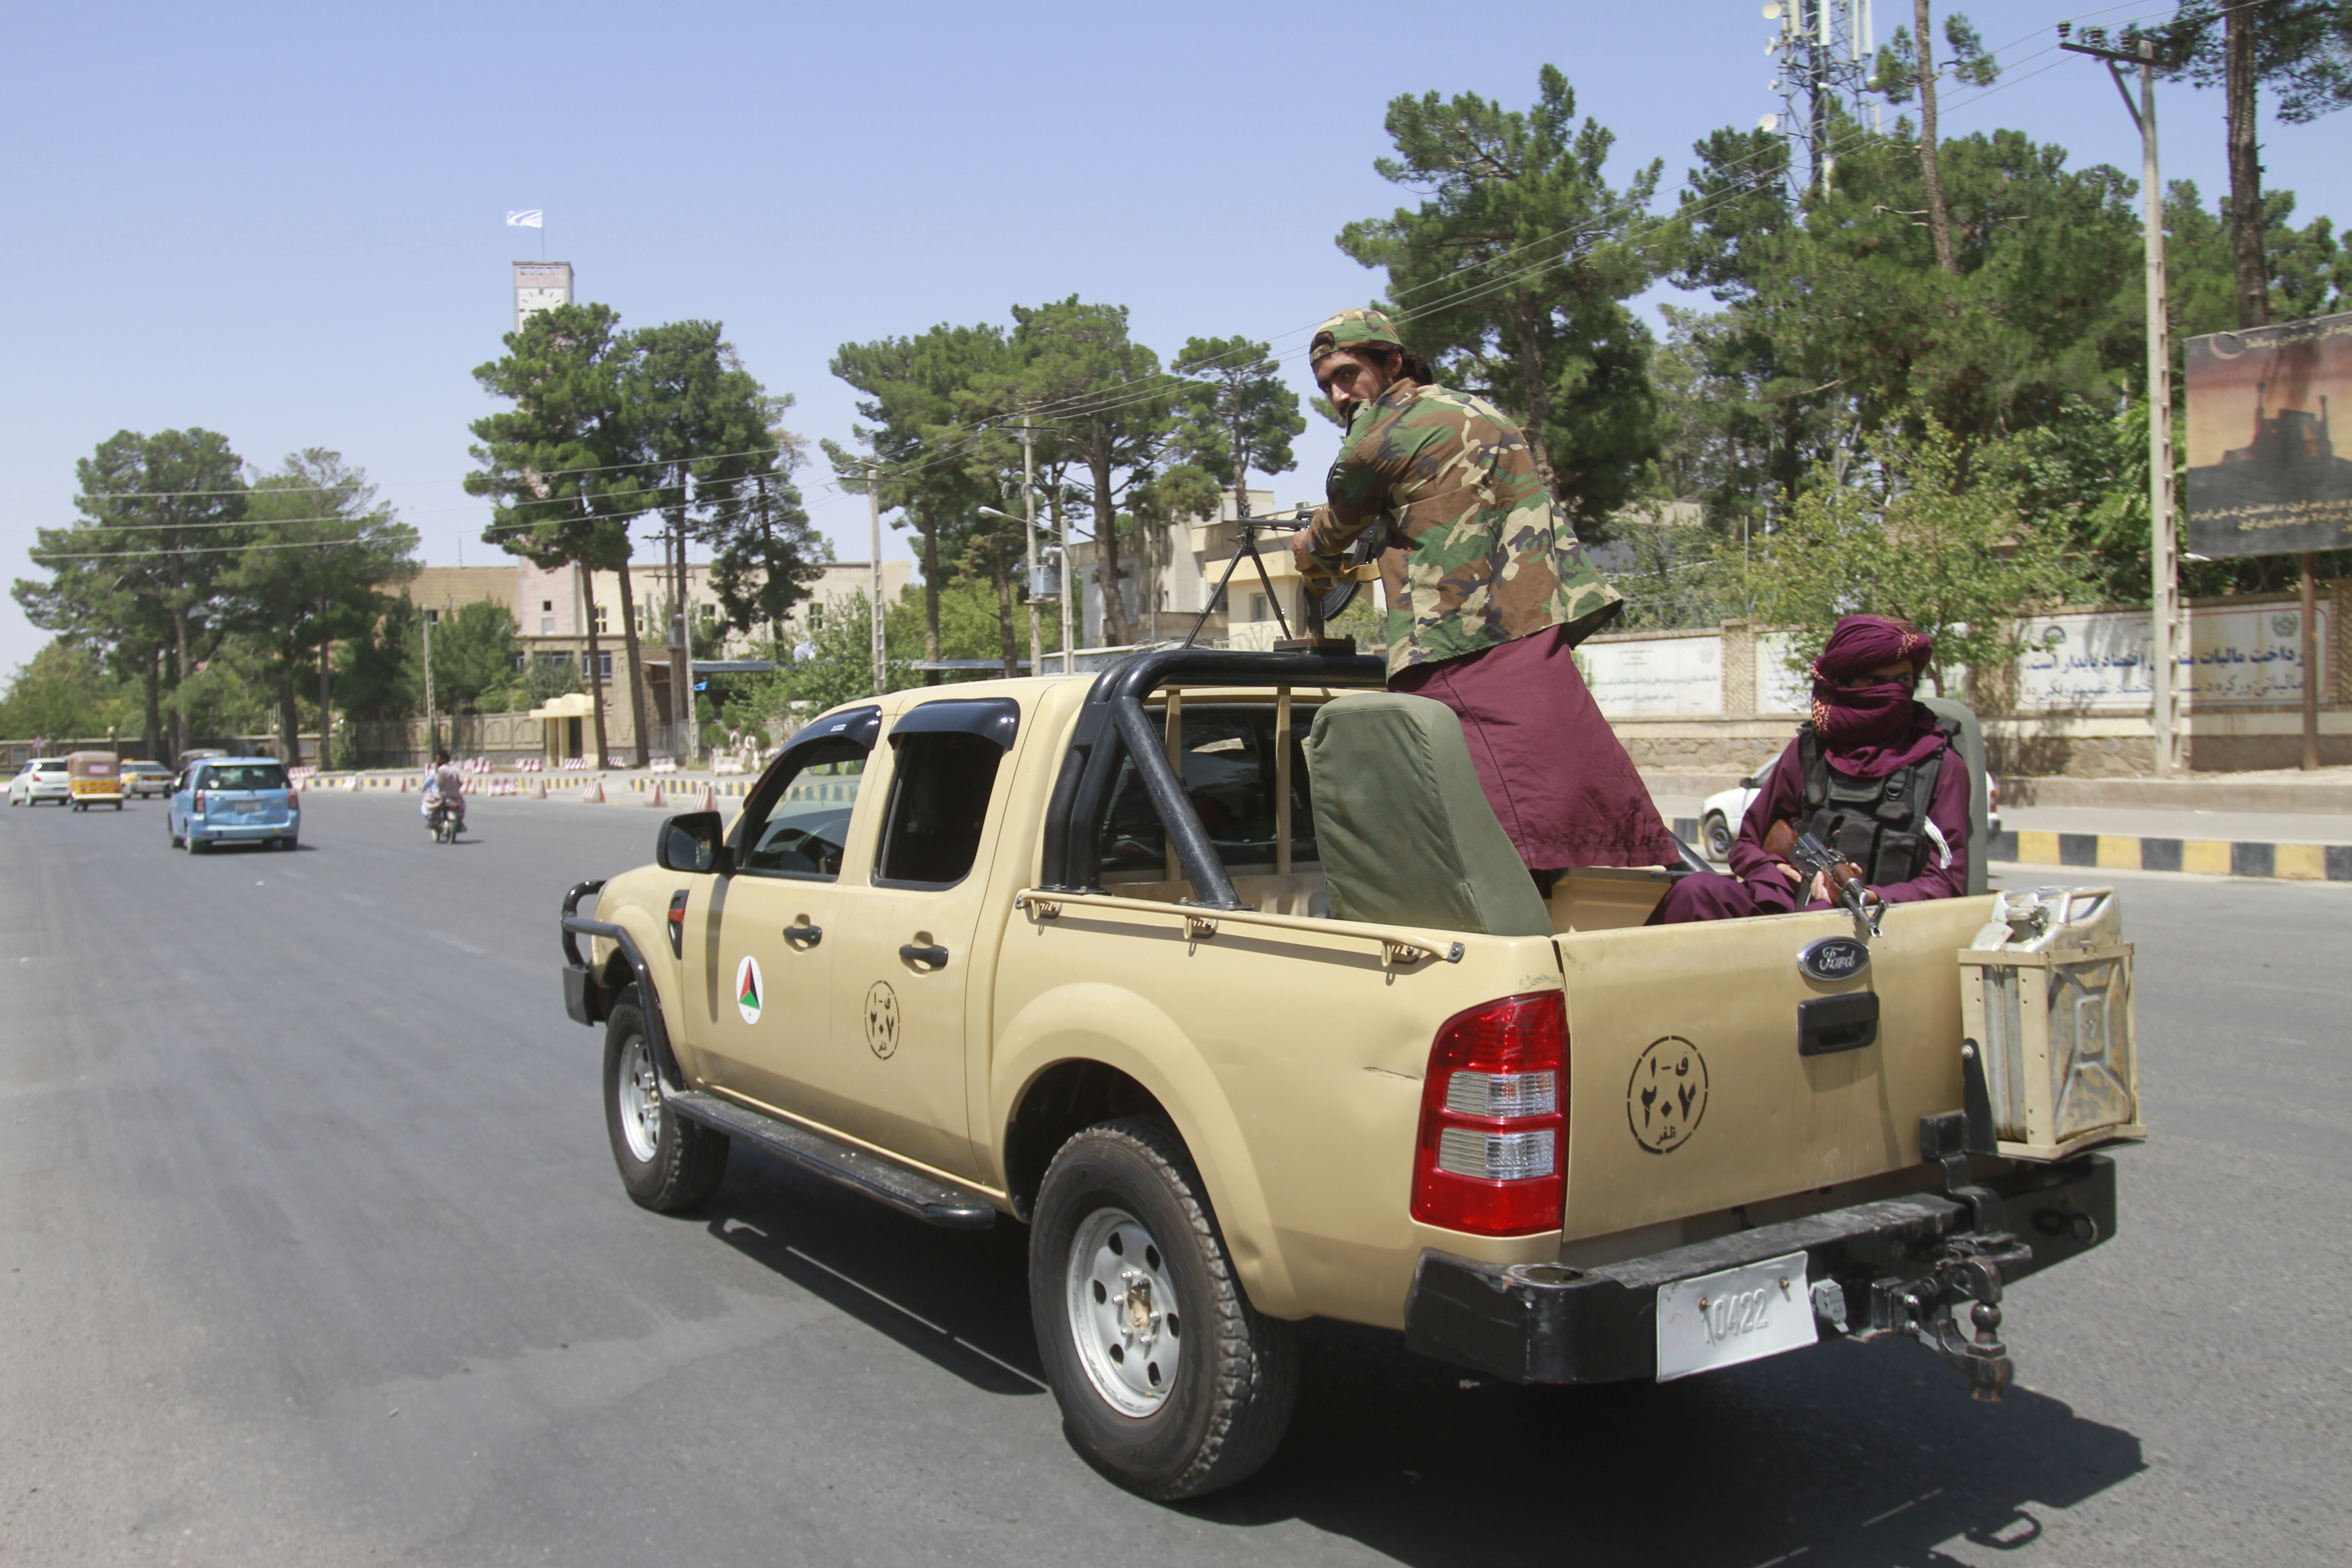 Taliban fighters sit on the back of a vehicle in the city of Herat, west of Kabul, Afghanistan